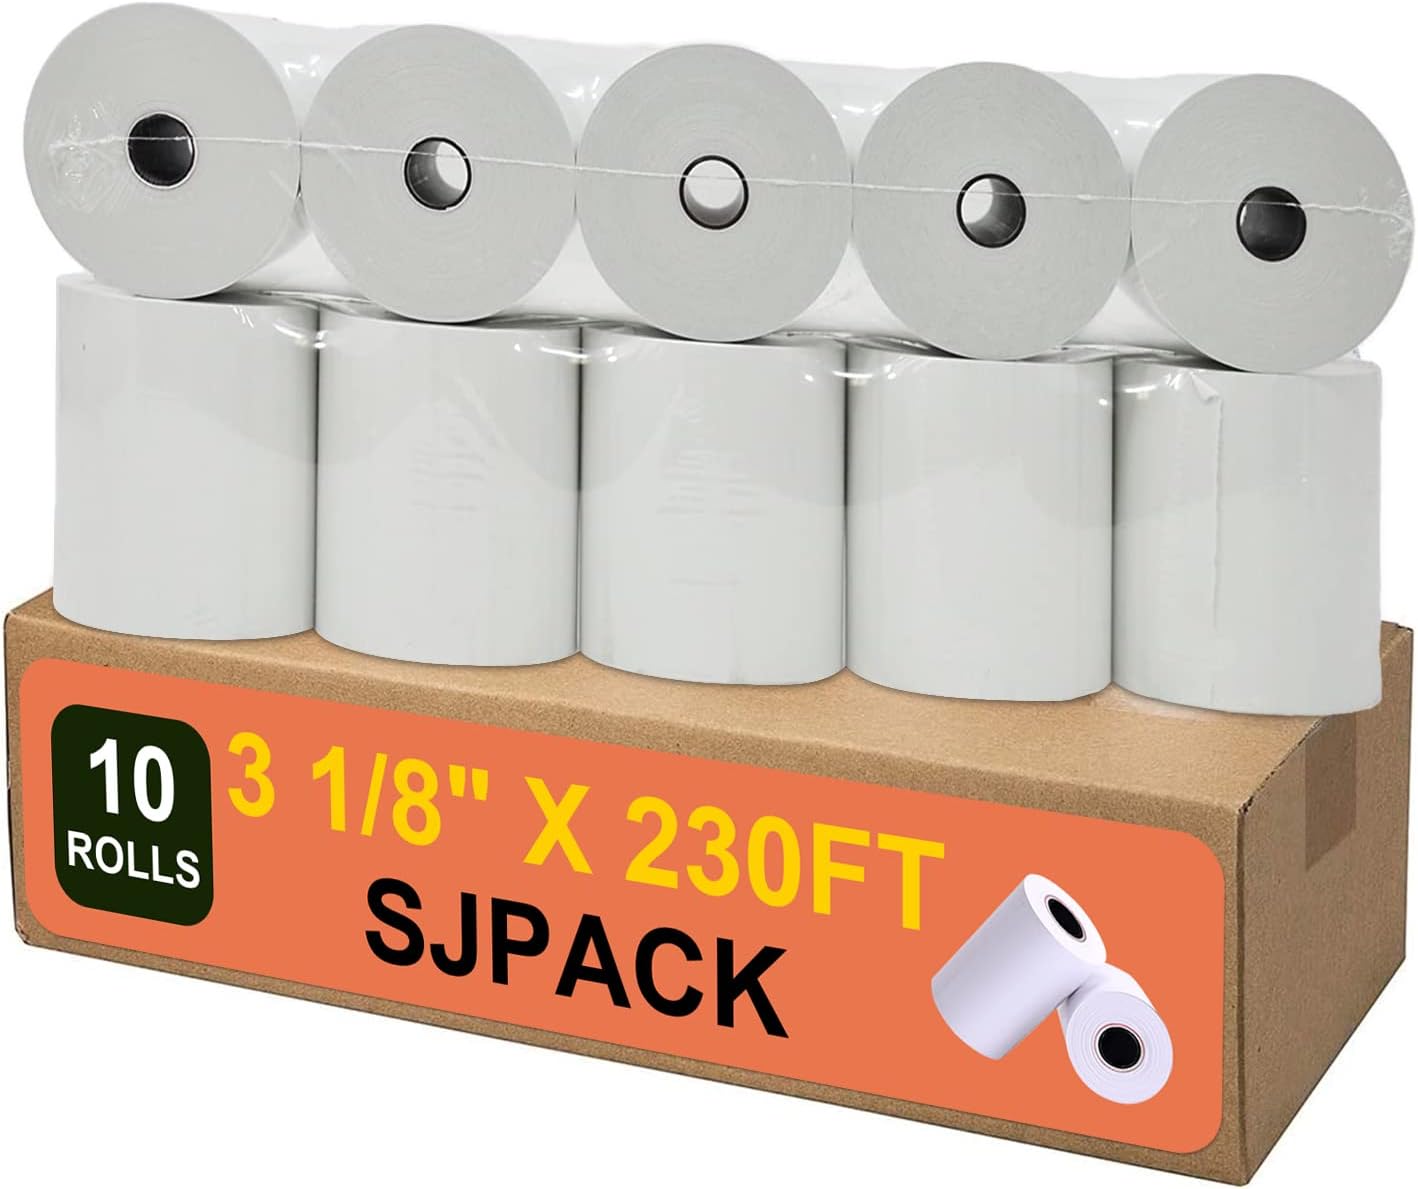 80mm-Thermal-Paper - 80mm Thermal Paper [10 Rolls]